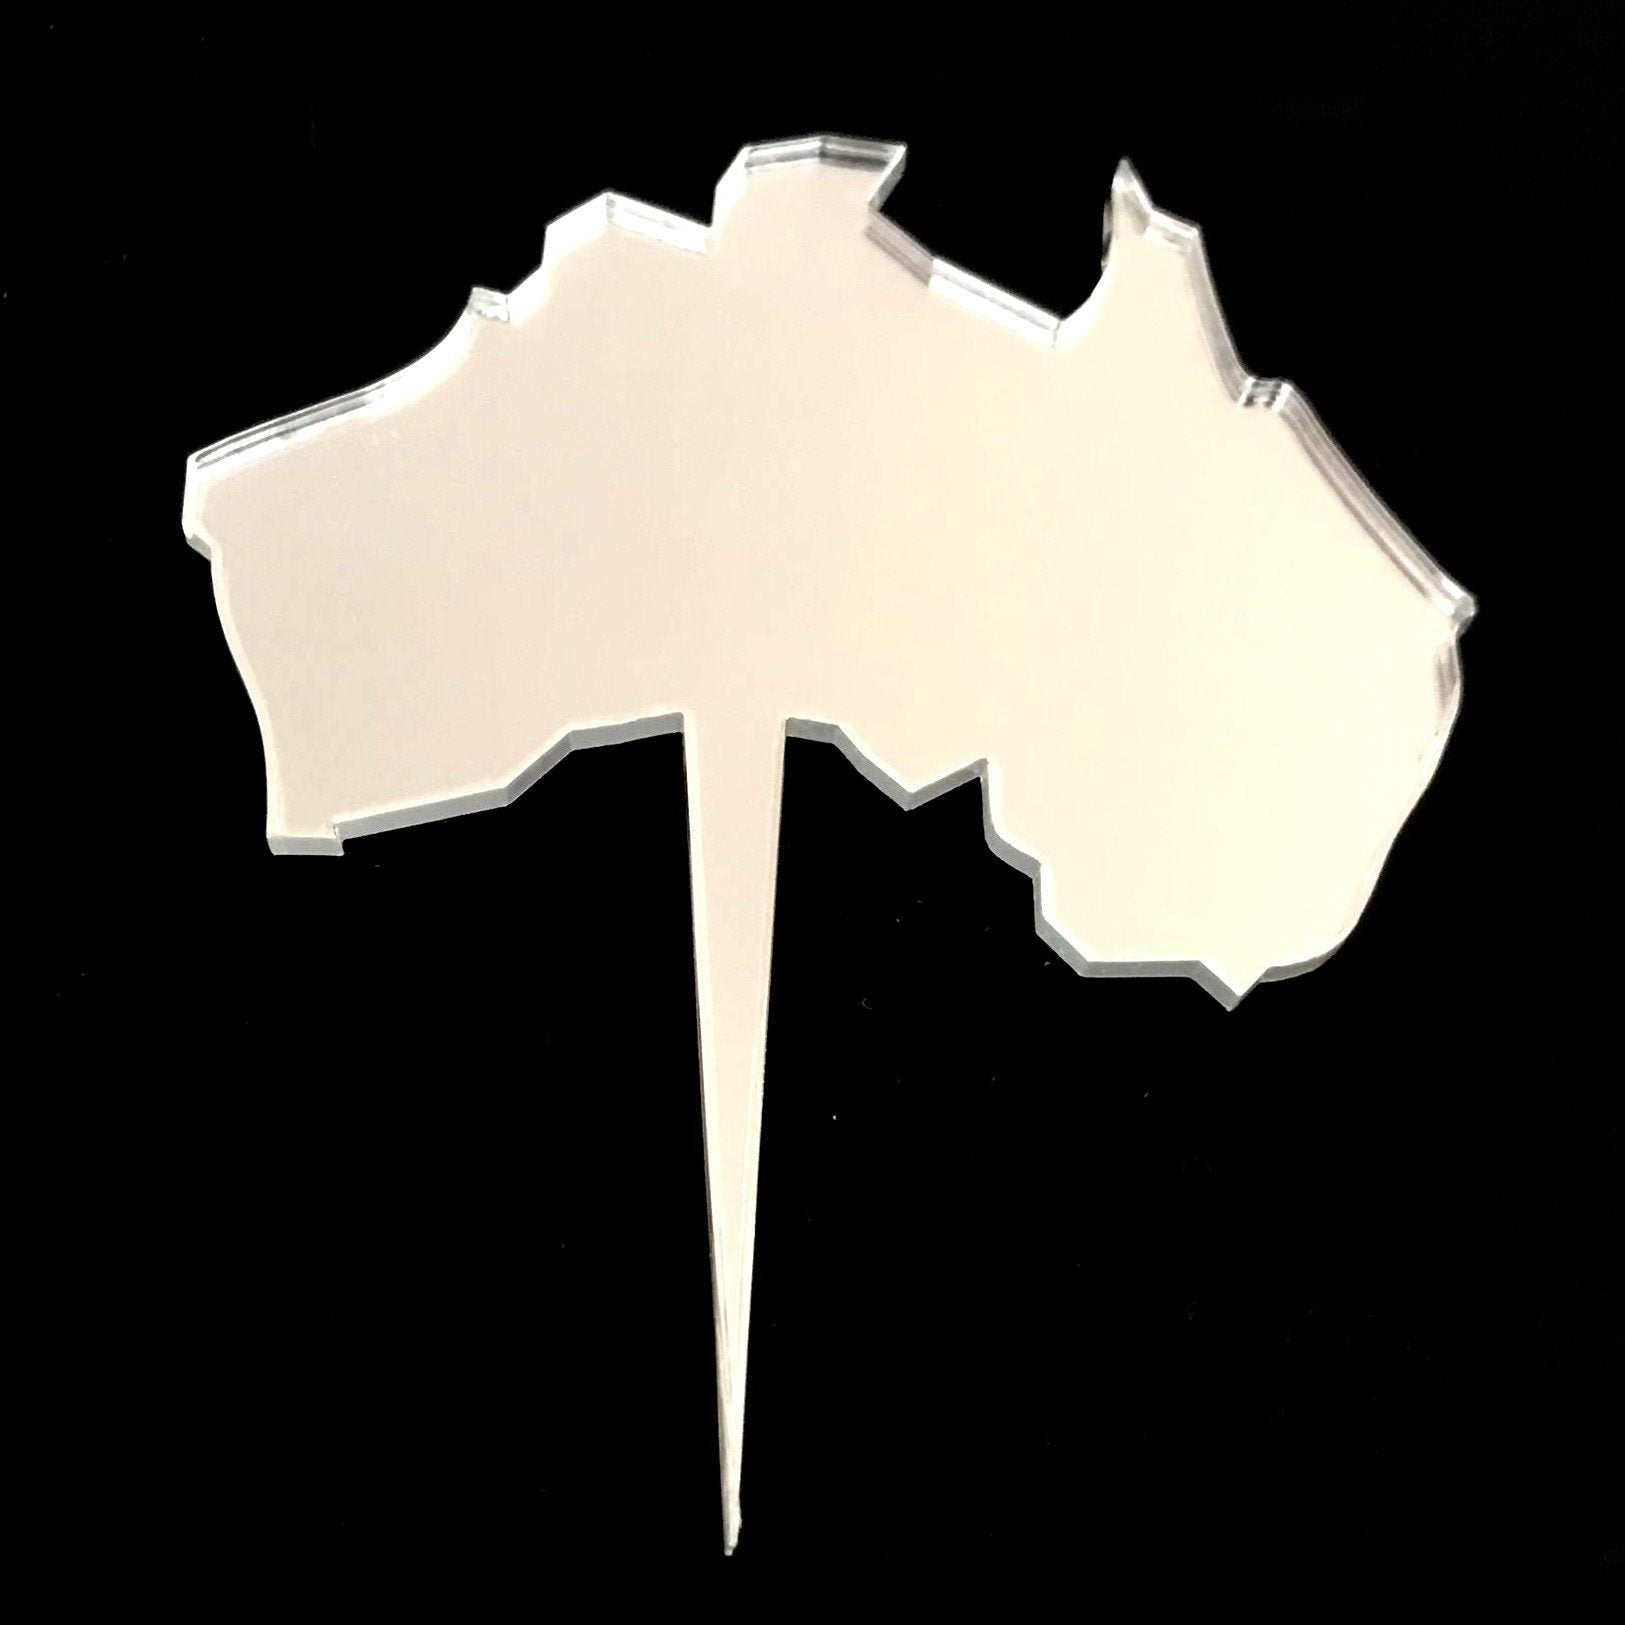 Australia Map Shaped Cake Toppers